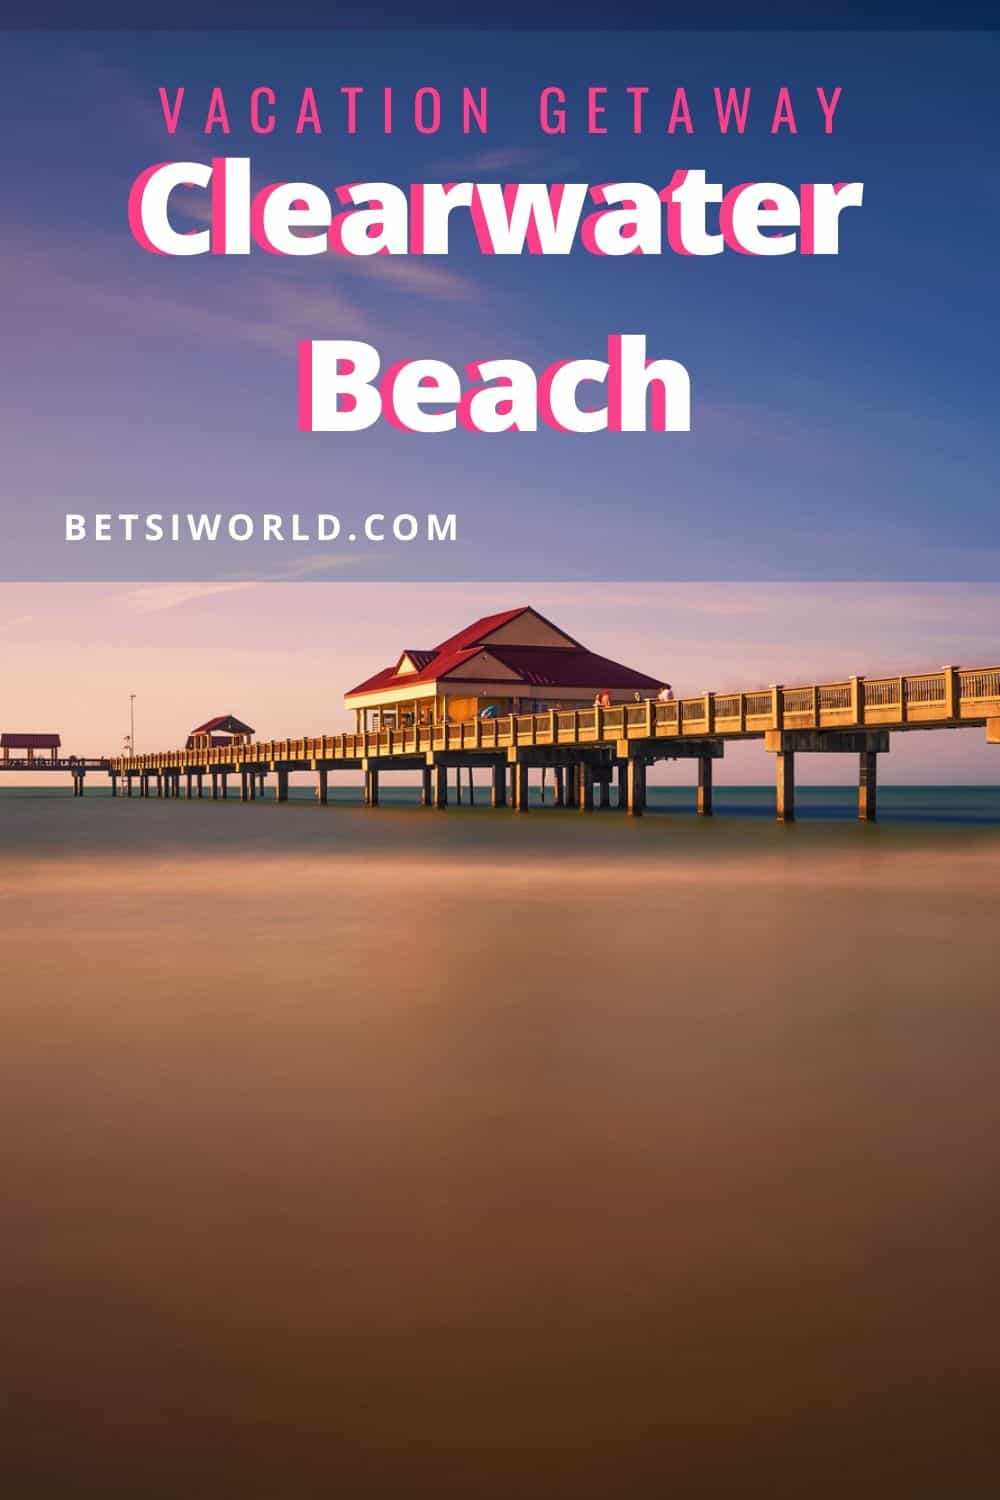 If You're Heading to the Gulf Coast, Clearwater Beach Florida is home to attractions, dining options and experiences perfect for a romantic getaway. Check out our ideas for a top-notch romantic vacay for two! For more inspired travel ideas, visit www.betsiworld.